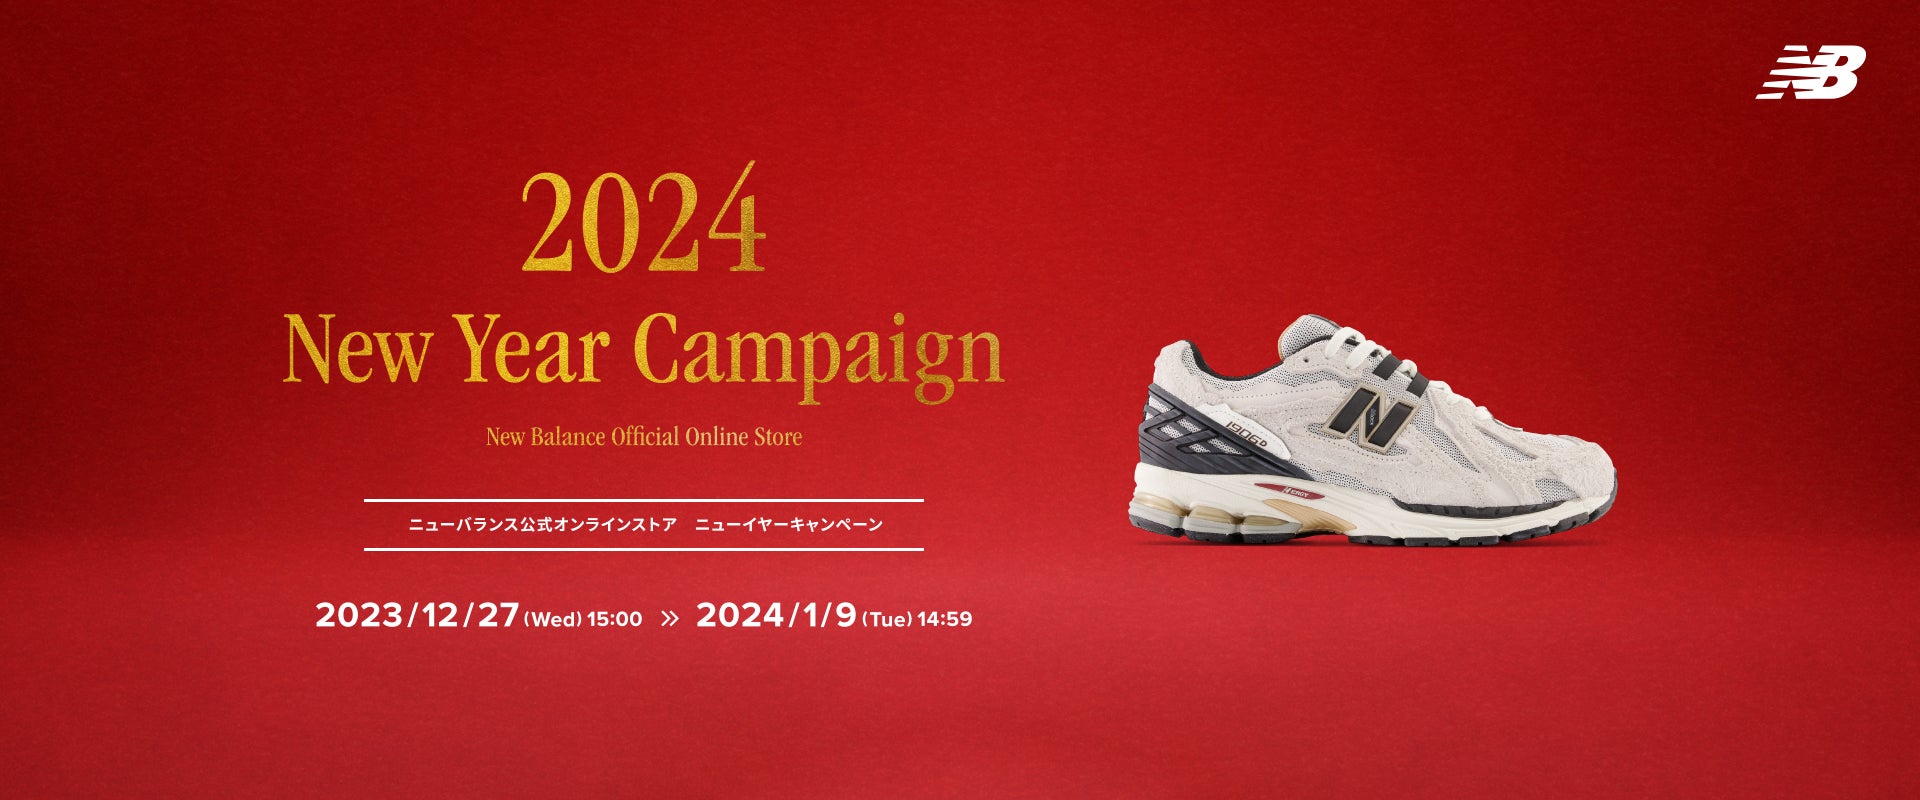 2024 New Year Campaign New Balance Official Online Store ニューバランス公式オンラインストア ニューイヤーキャンペーン 2023/12/27(wed)15:00＞＞2024/1/9(Tue)14:59